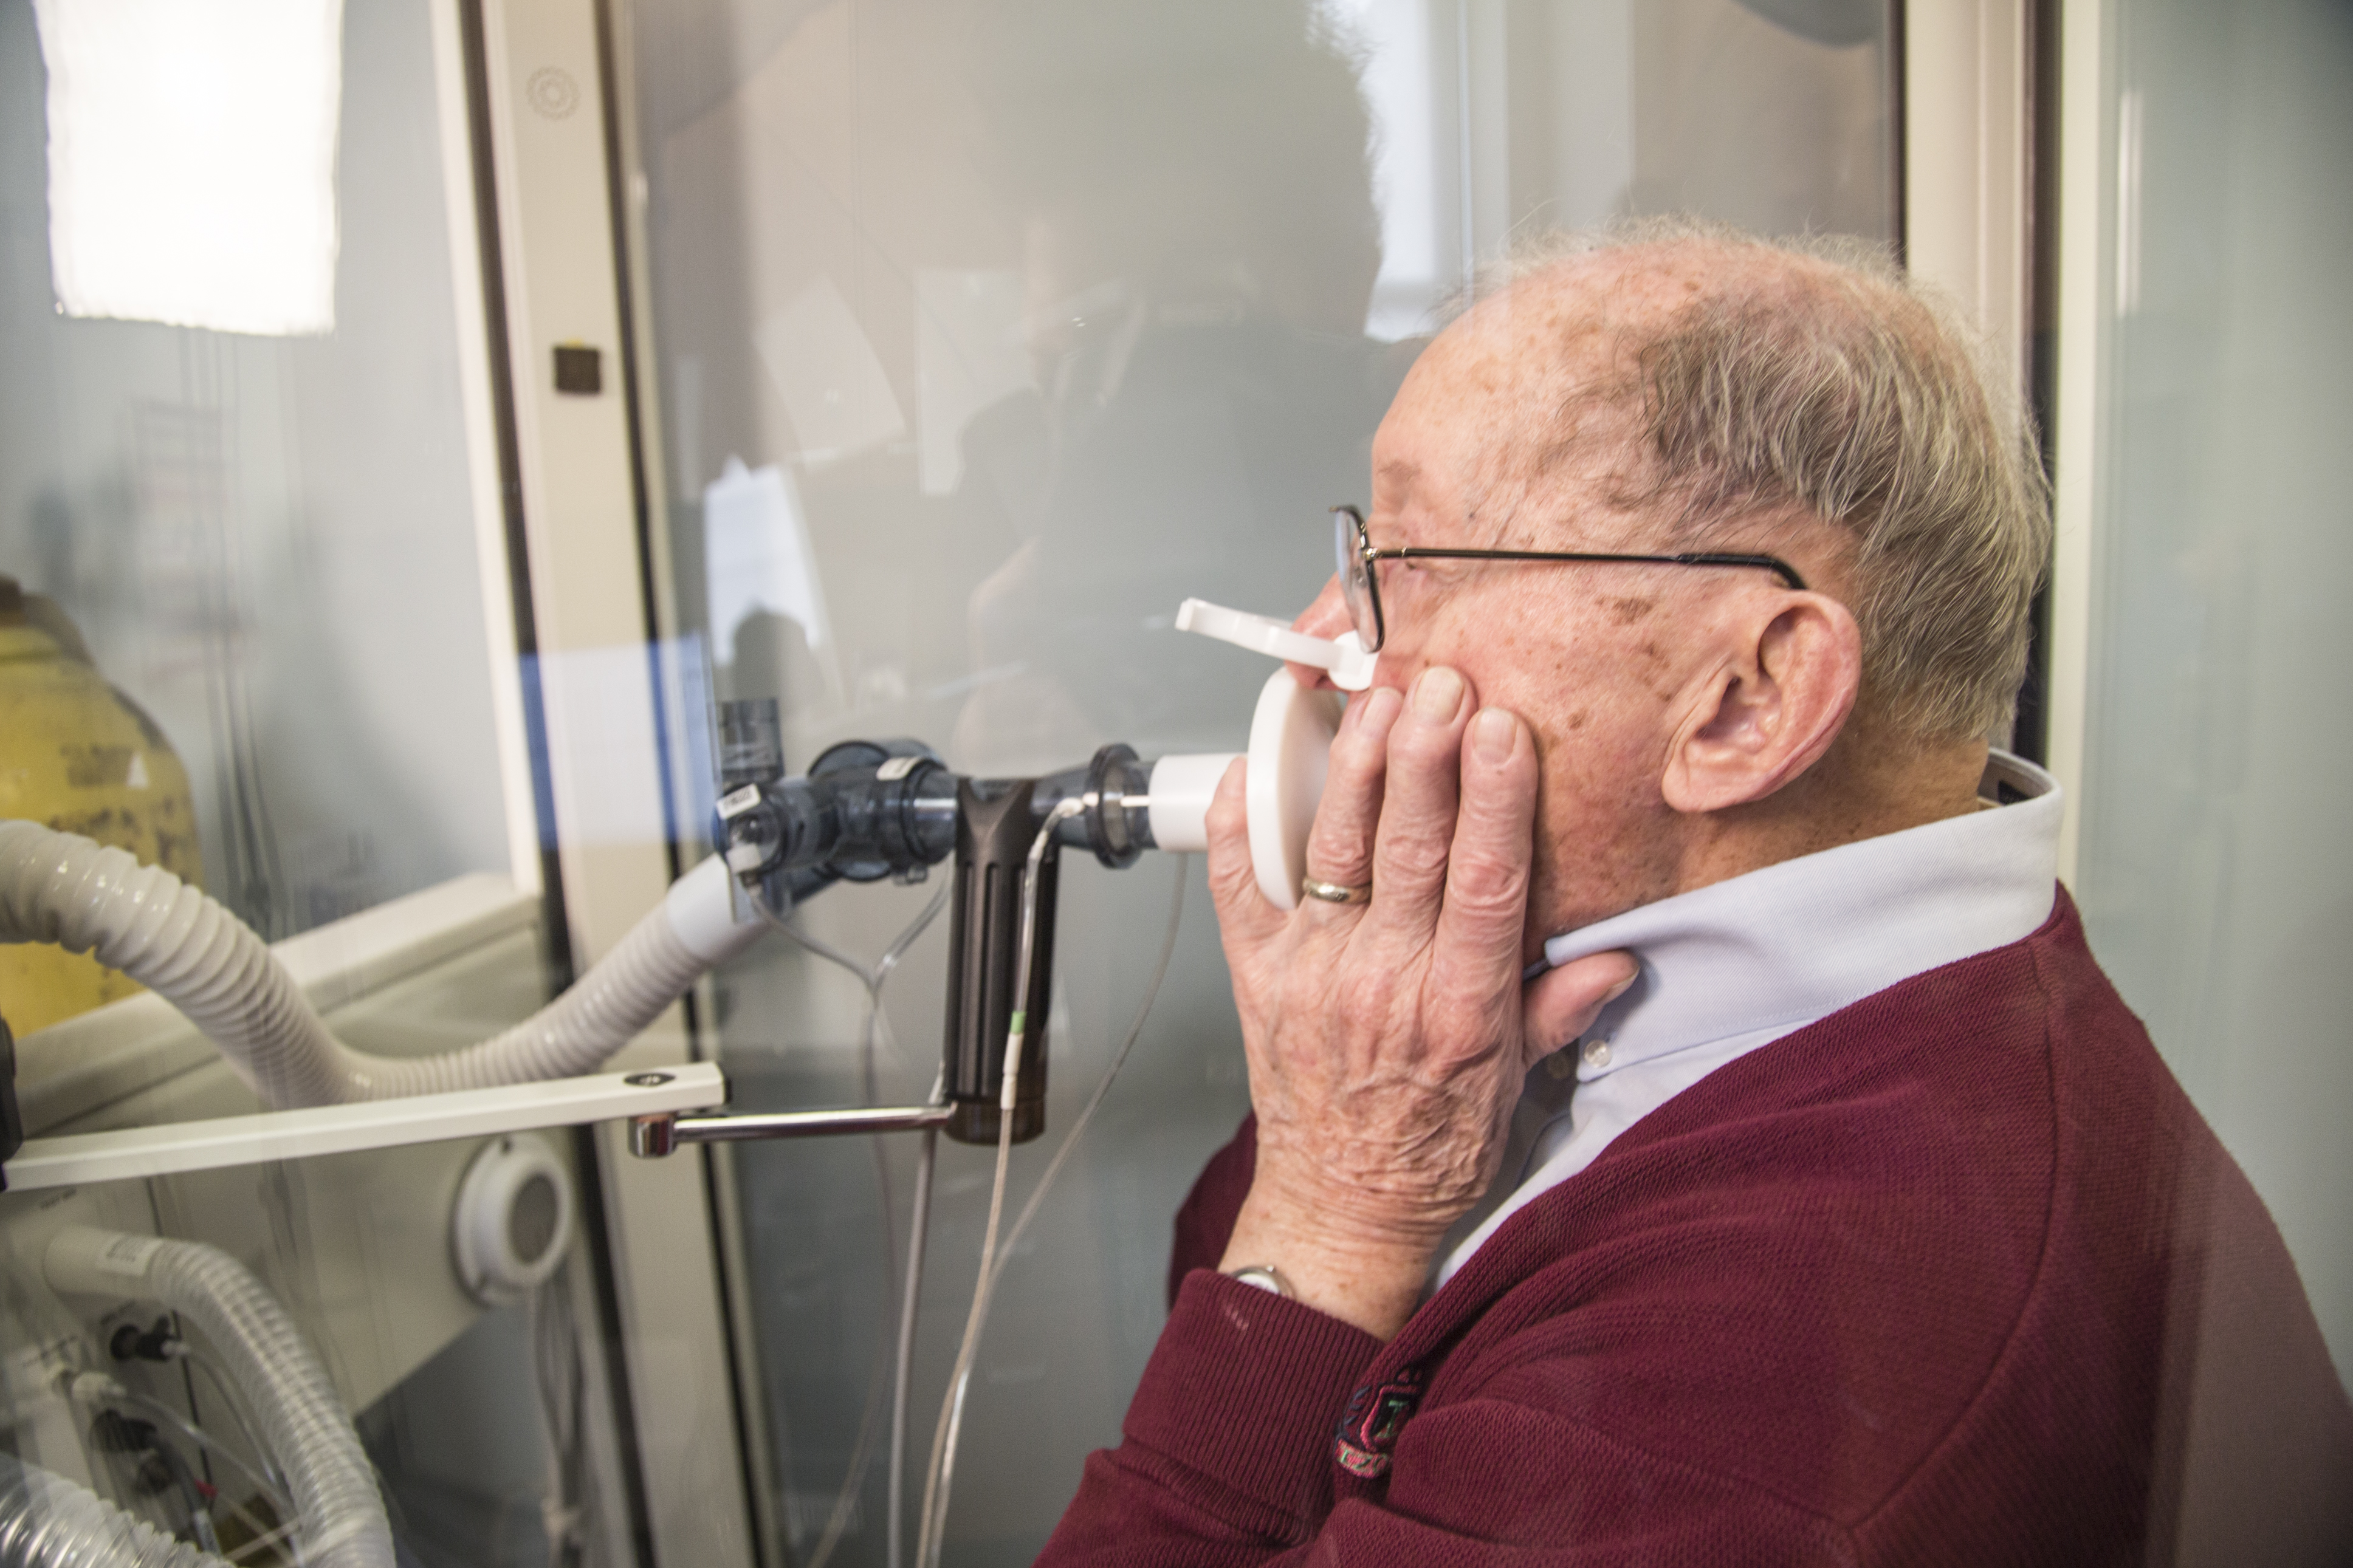 Study highlights importance of spirometry in diagnosing COPD.